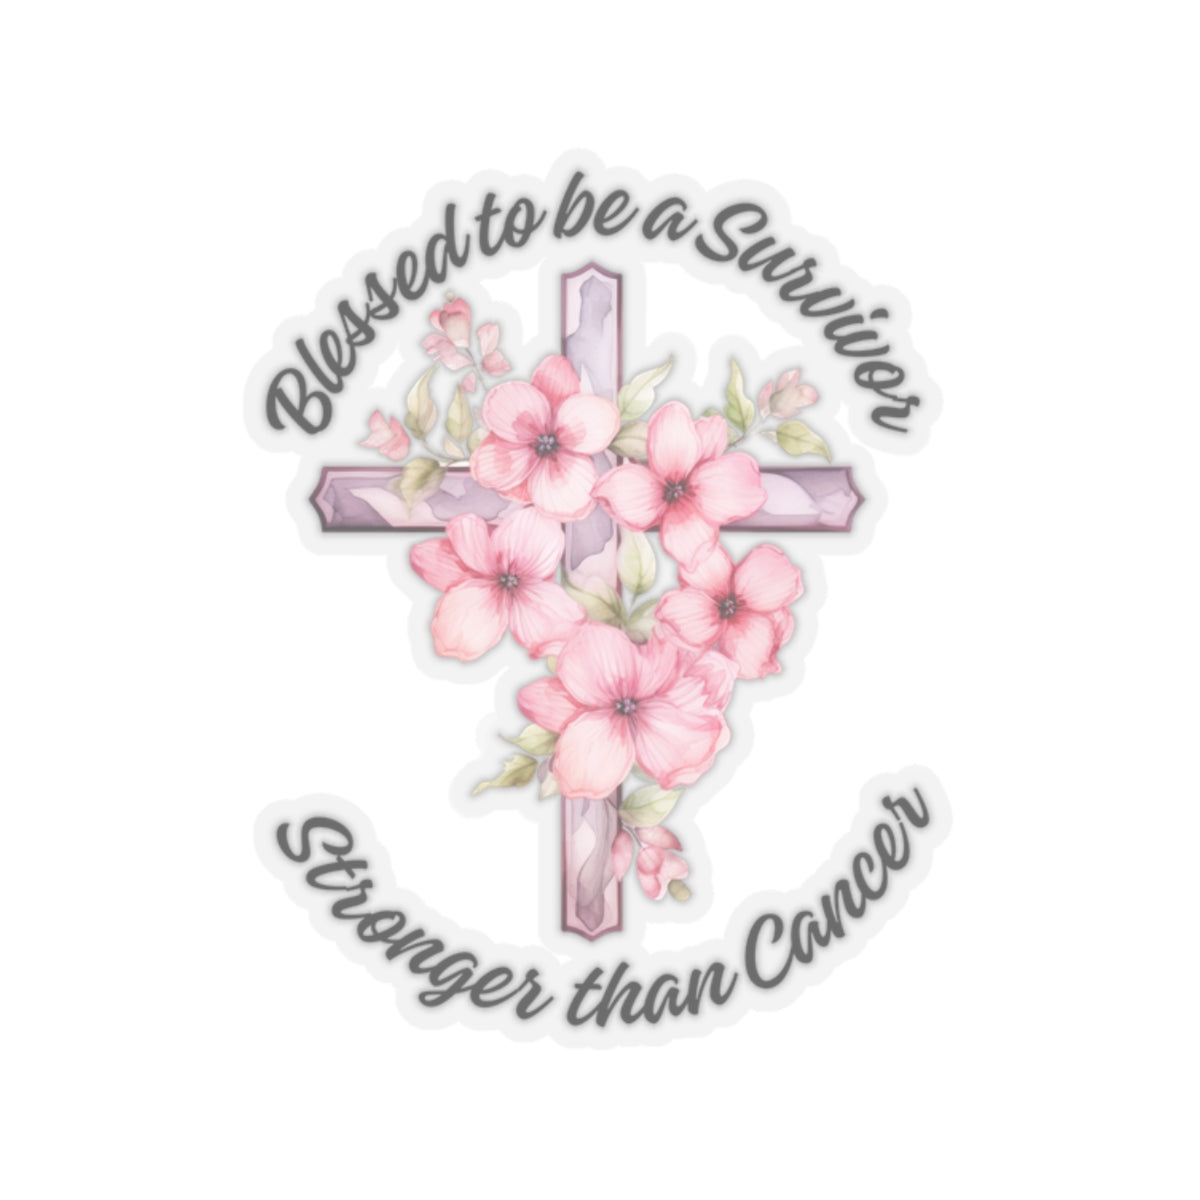 Blessed to Be A Survivor...Inspirational Quote Kiss-Cut Stickers-Paper products-2" × 2"-Transparent-mysticalcherry